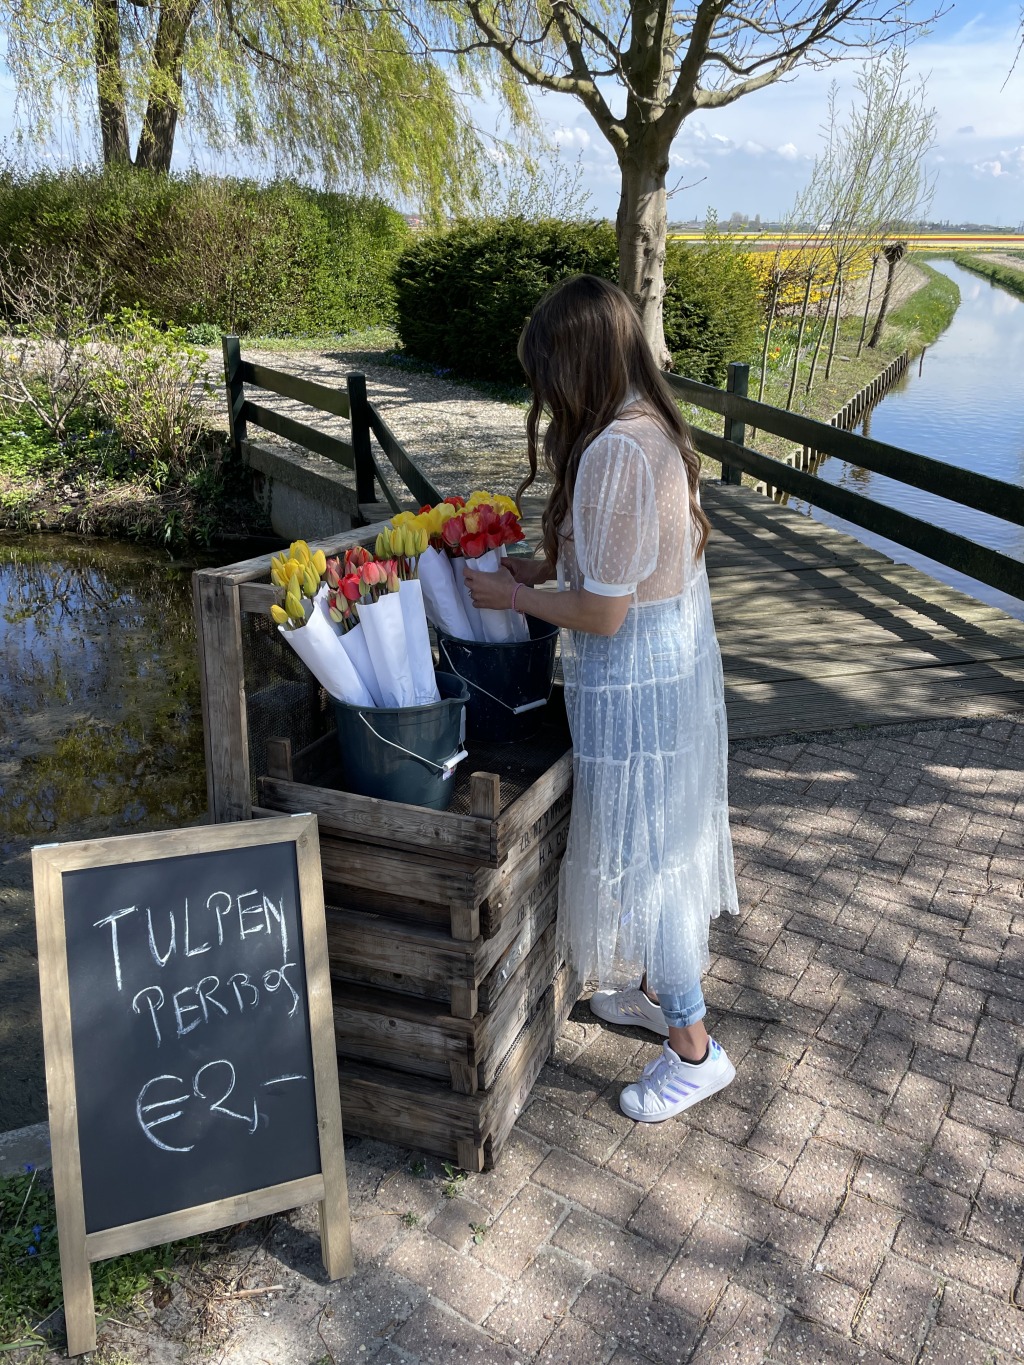 How to Visit the Tulips in the Netherlands